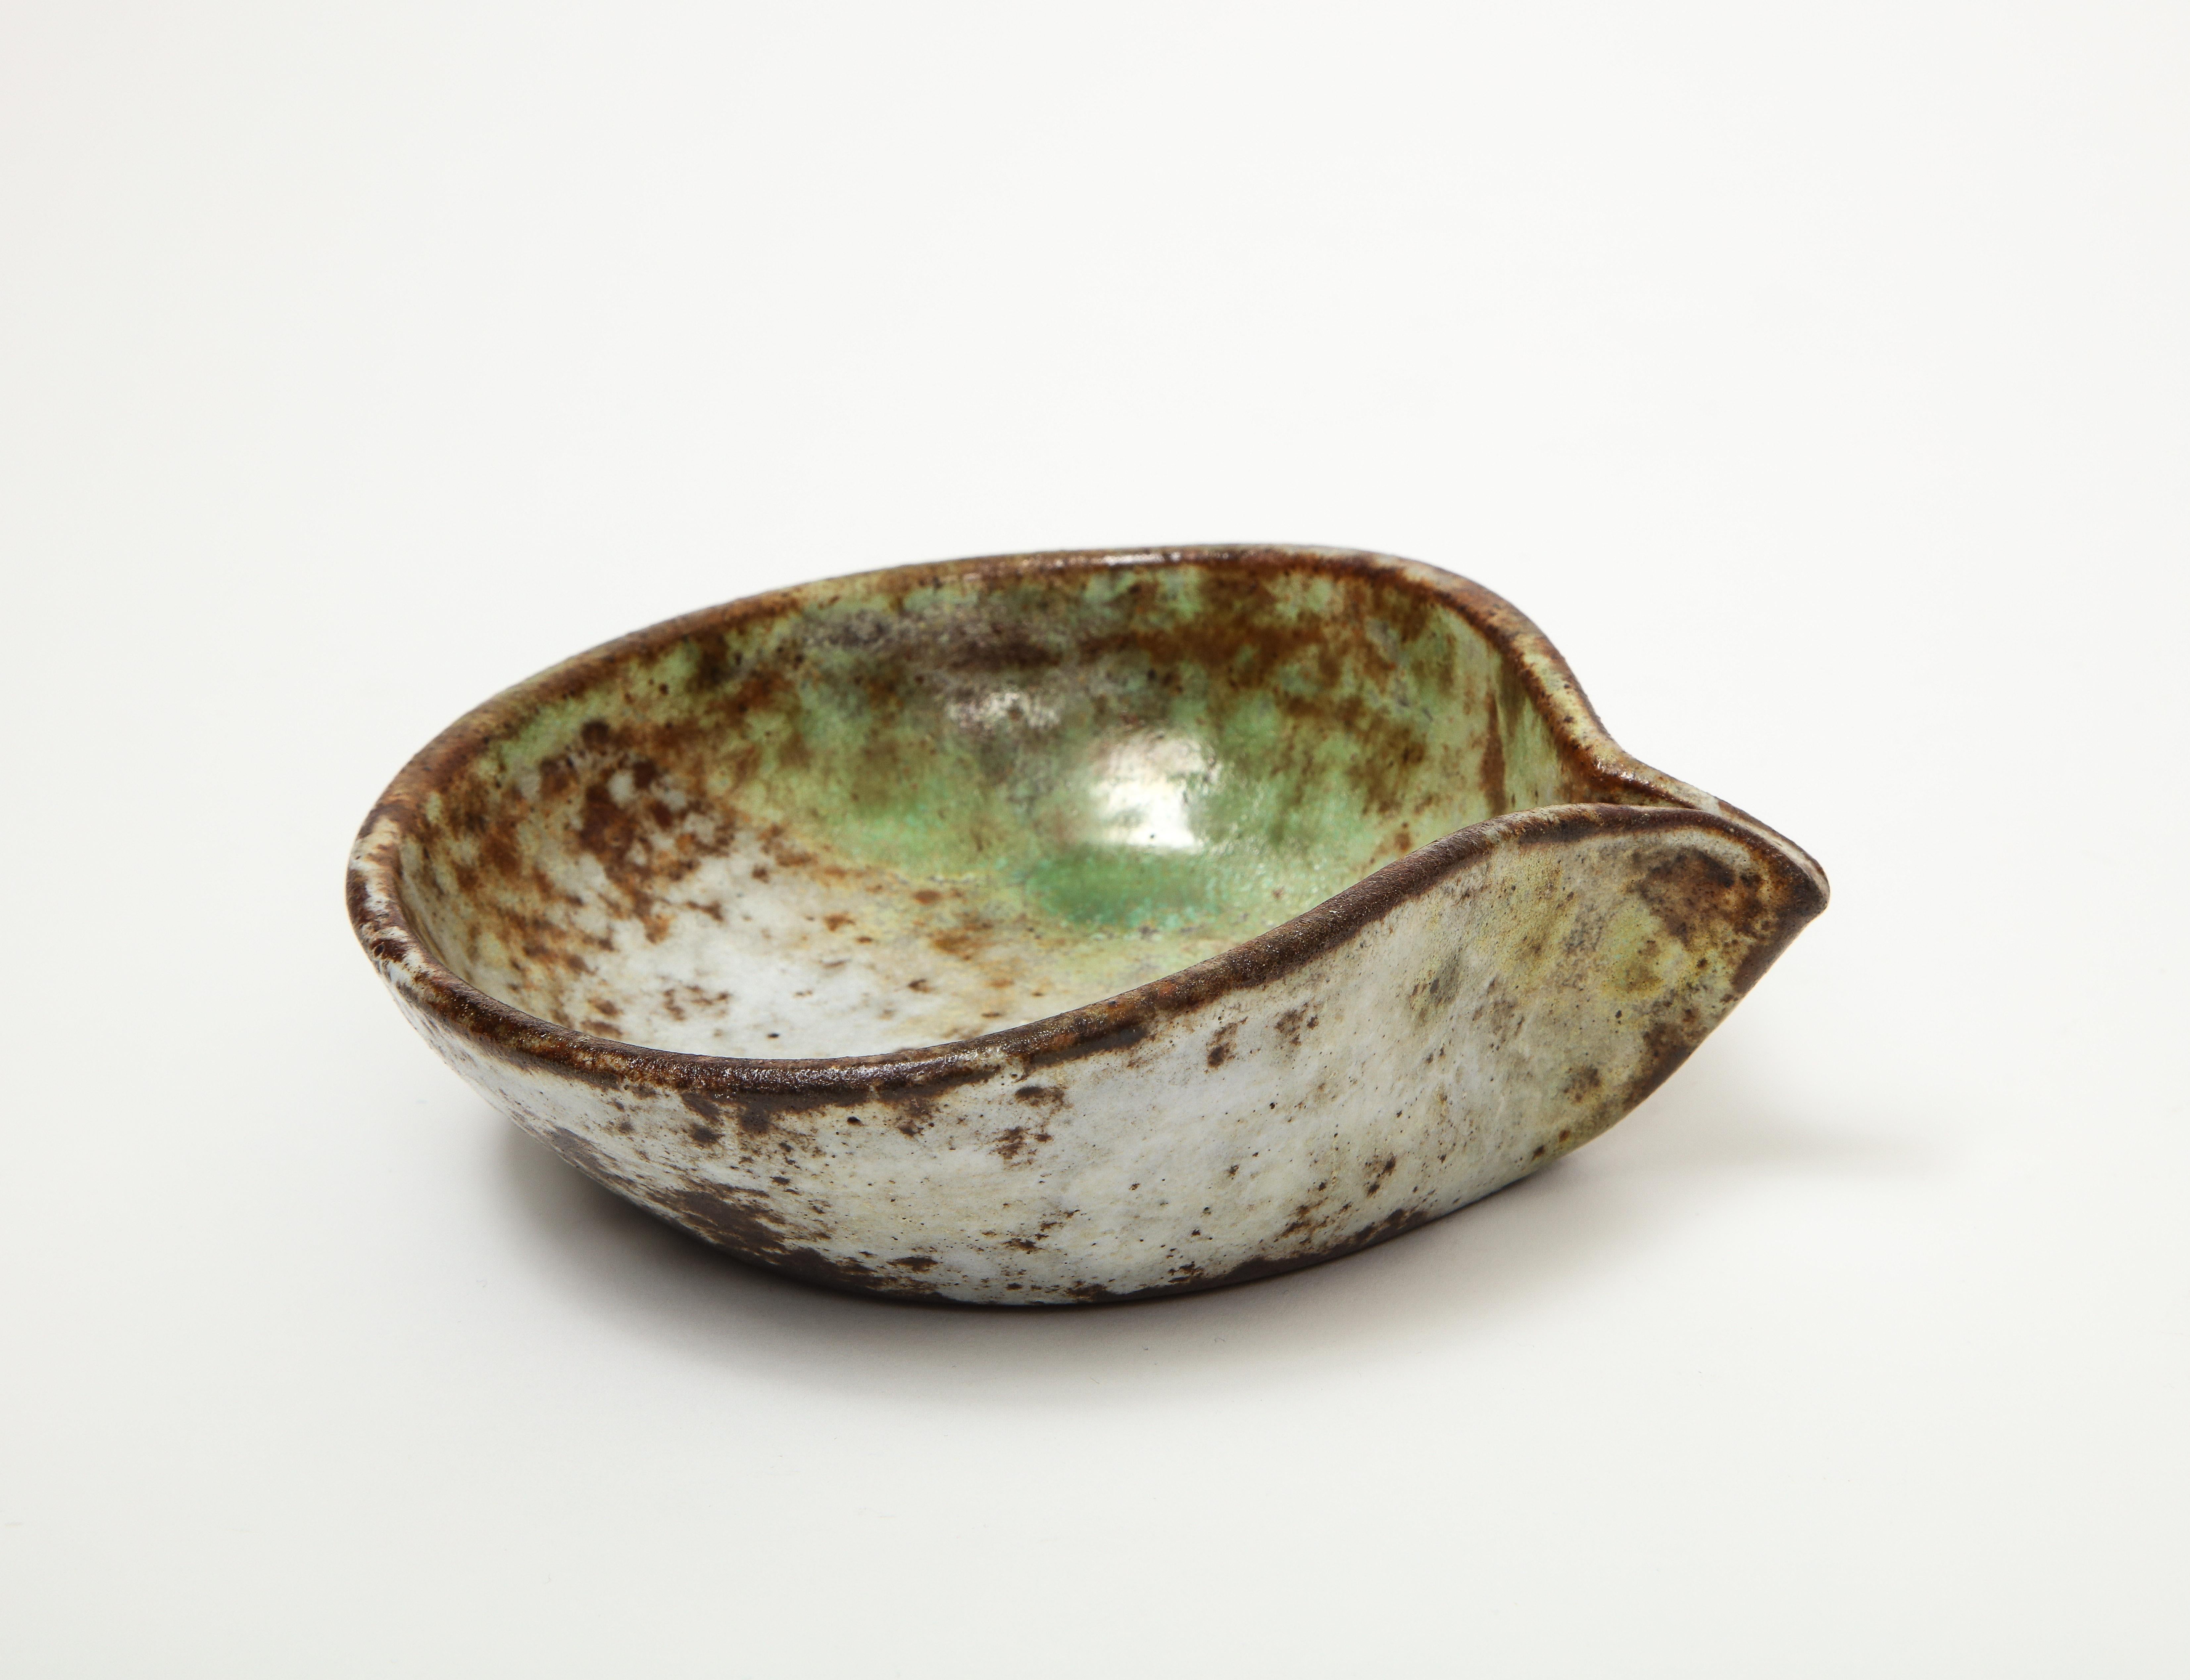 Small pinched ceramic dish in speckled glaze, signed by Alexandre Kostanda, Vallauris, France, circa 1960s.